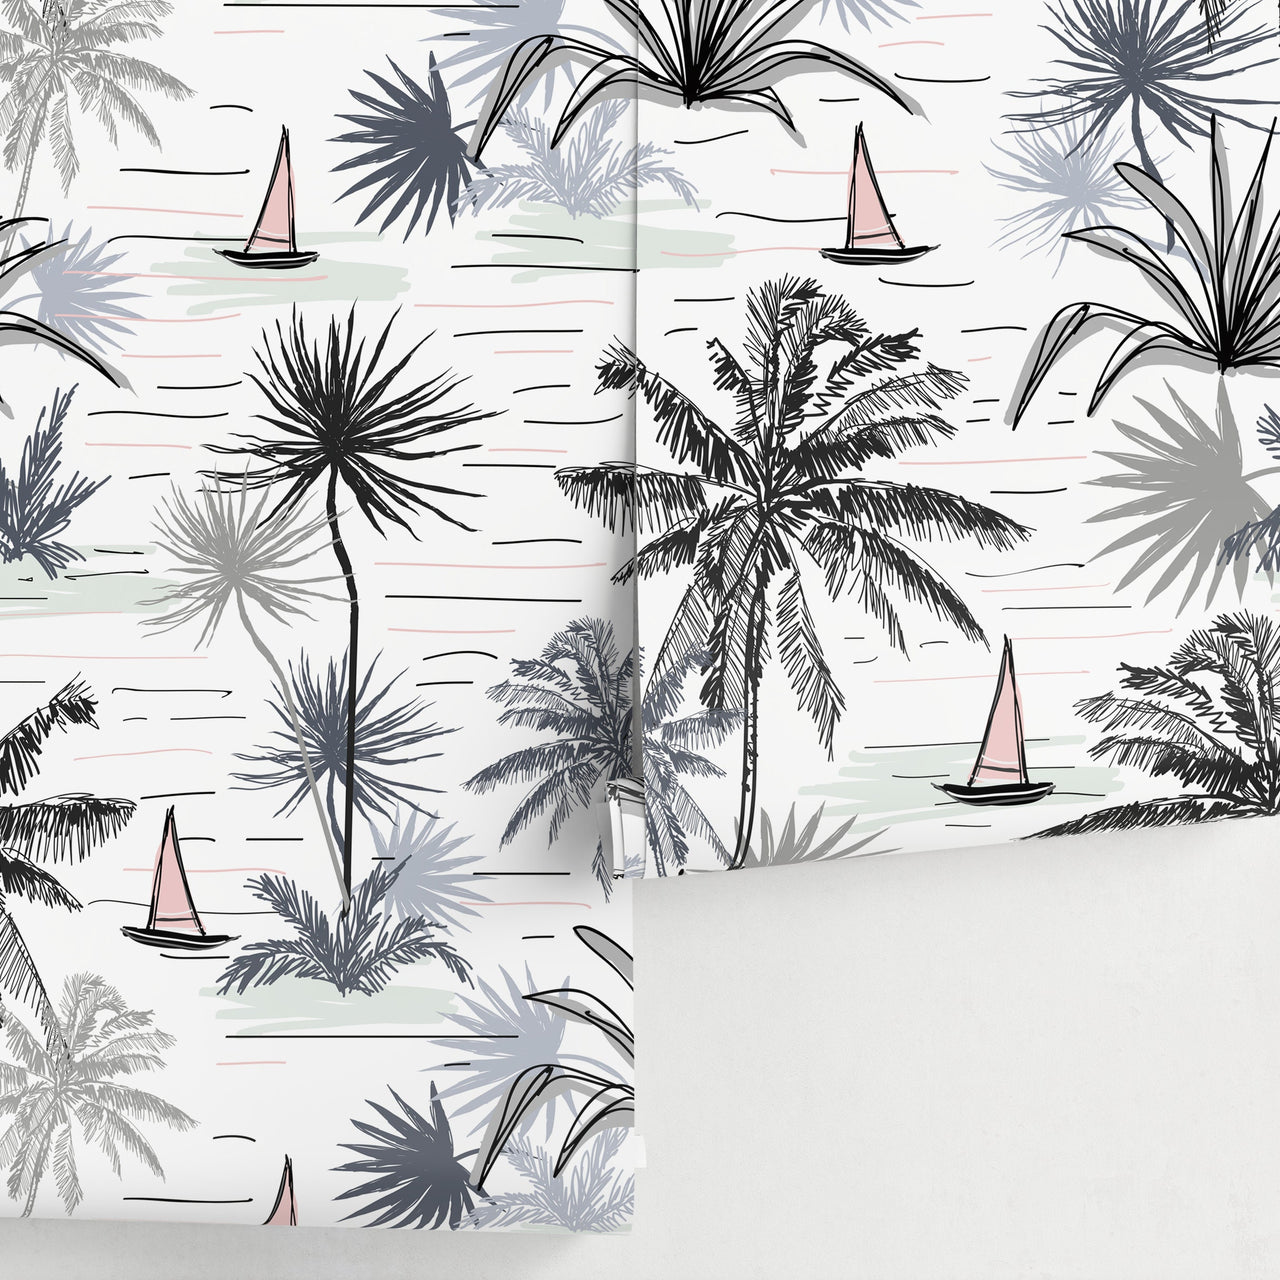 Wallpaper Peel and Stick Wallpaper Removable Wallpaper Home Decor Wall Art Wall Decor Room Decor / Boho Palms and Boat Wallpaper - A792